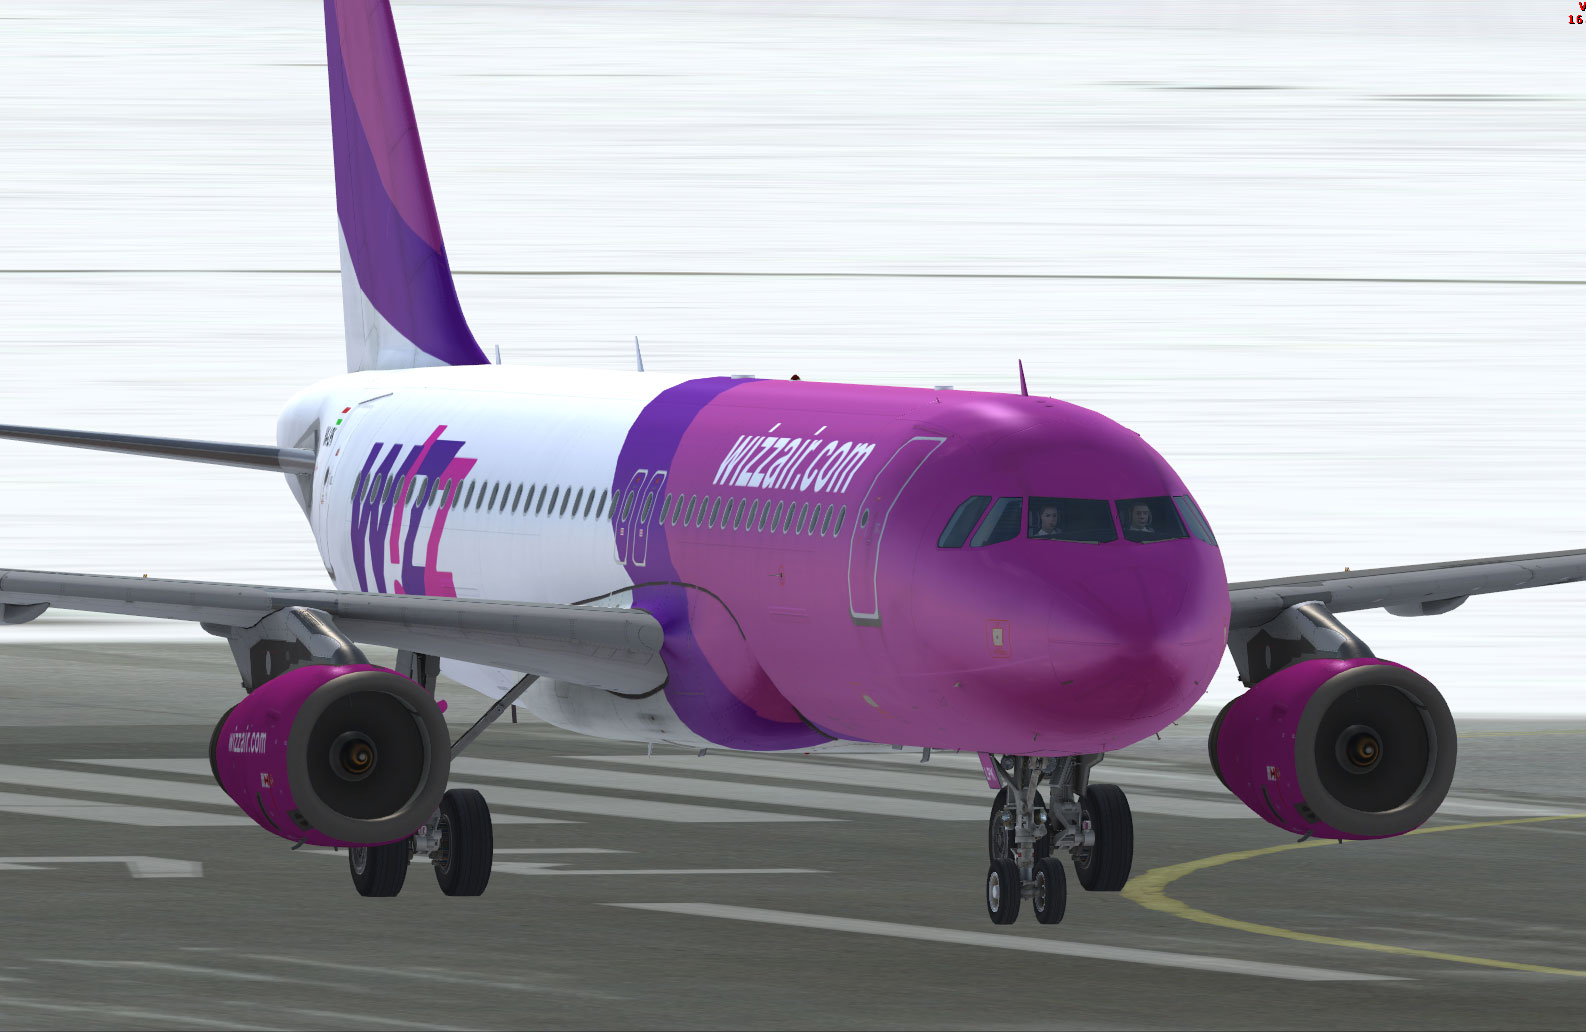 More information about "Wizz Air A320 IAE"